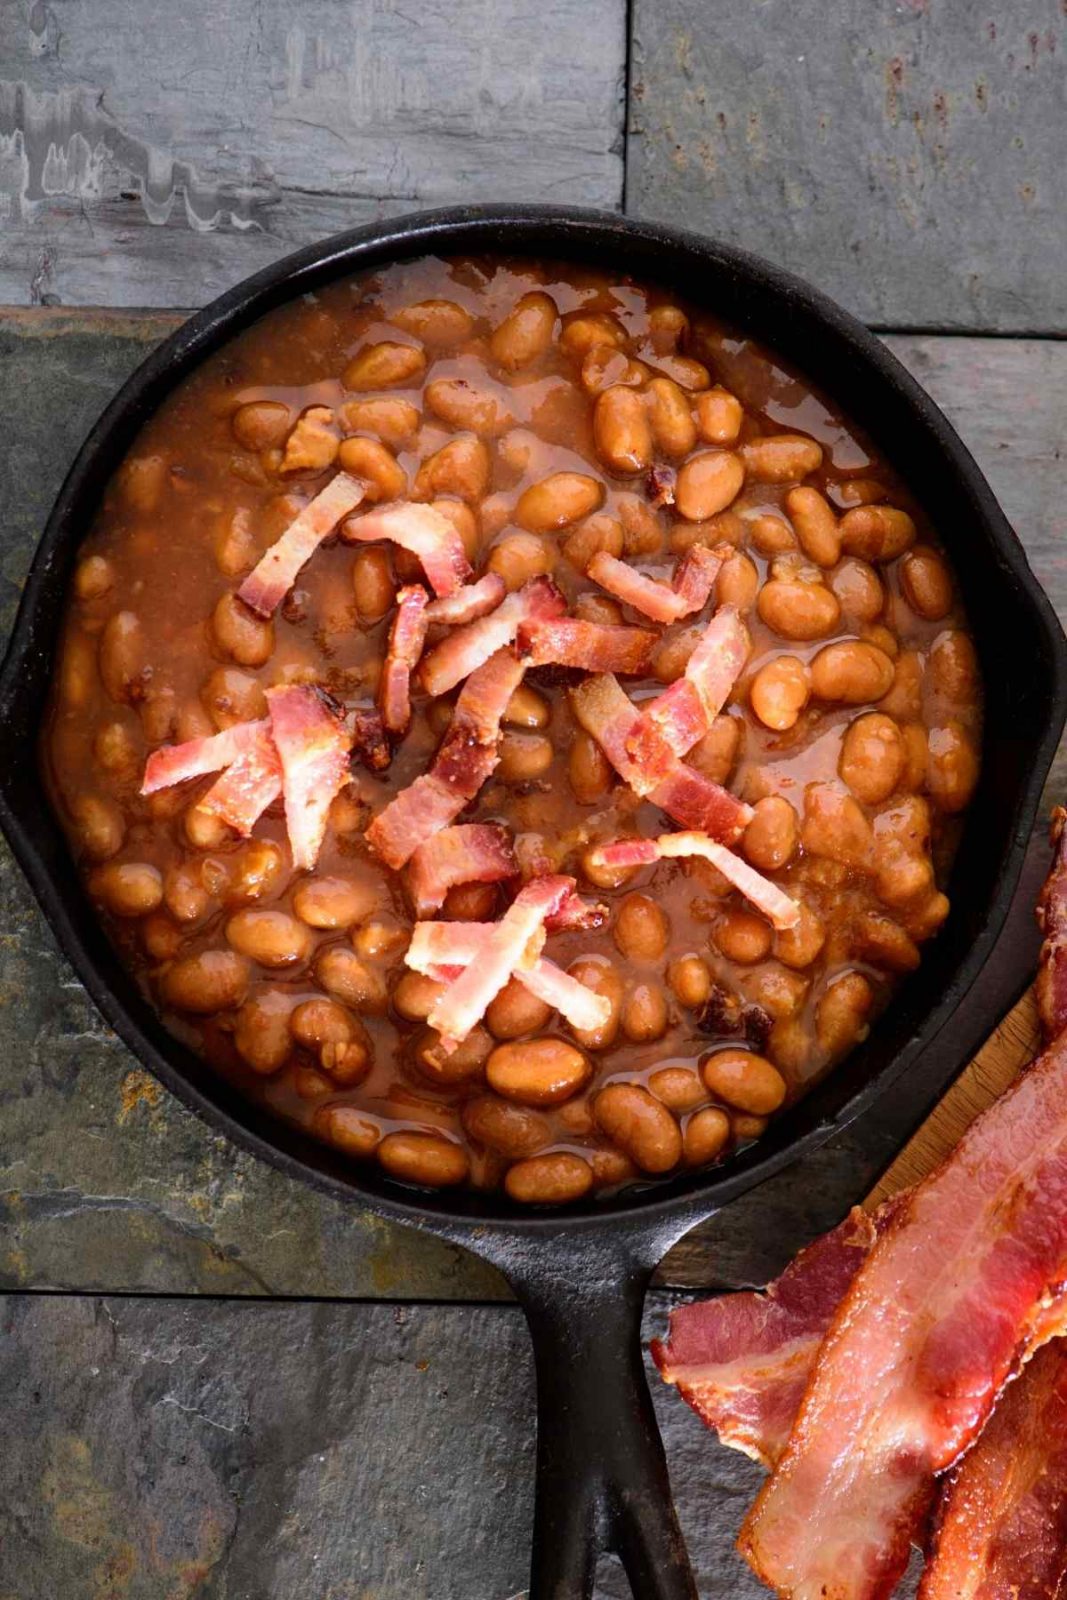 This simple stovetop dish is set to become your favorite Pork and Beans recipe! Full of delicious sweet and smokey flavors, it's the ideal side to serve at your next backyard BBQ!